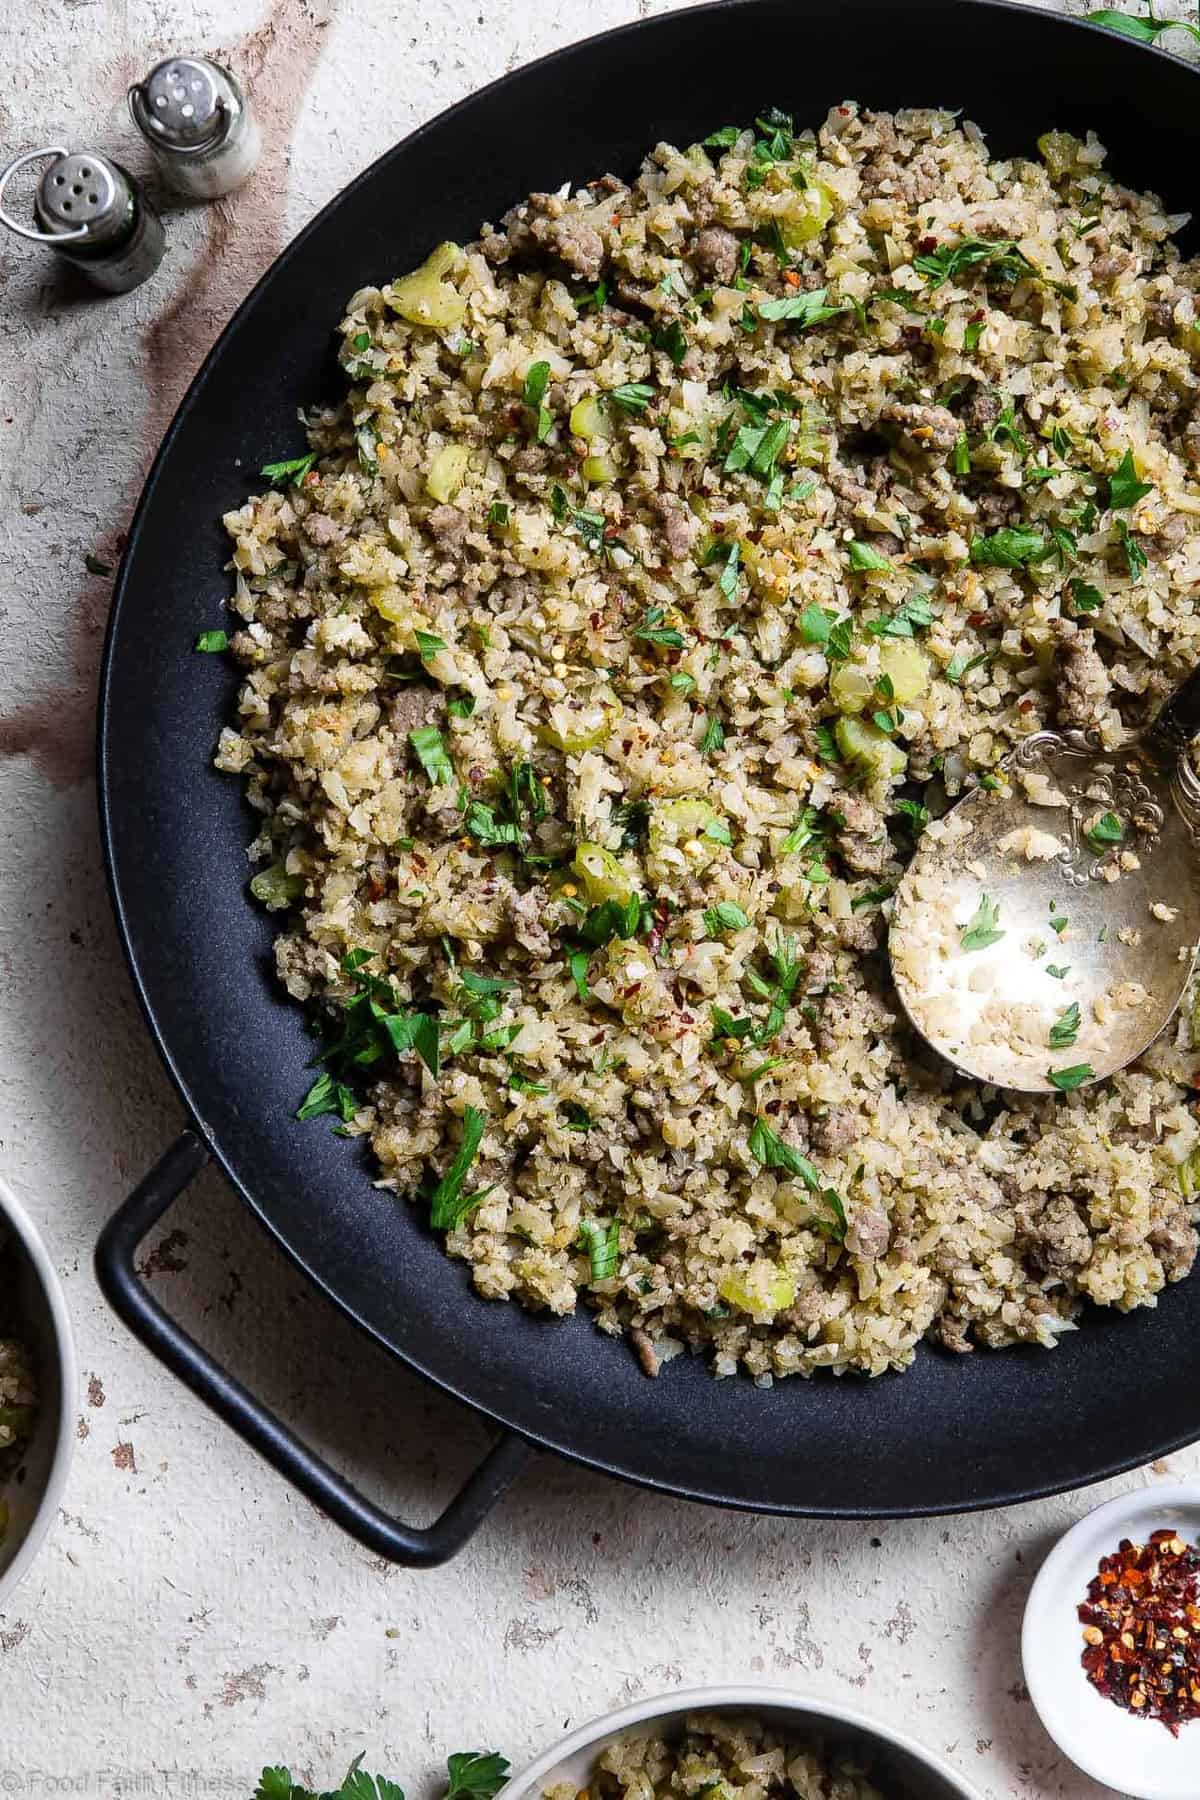 Keto Low Carb Riced Cauliflower Stuffing - This cauliflower rice stuffing is an EASY healthy holiday side that tastes like comfort food, but you won't miss the carbs! Paleo/whole30, only 150 calories and 3 SmartPoints! | #Foodfaithfitness | #Glutenfree #Paleo #Lowcarb #Keto #Whole30